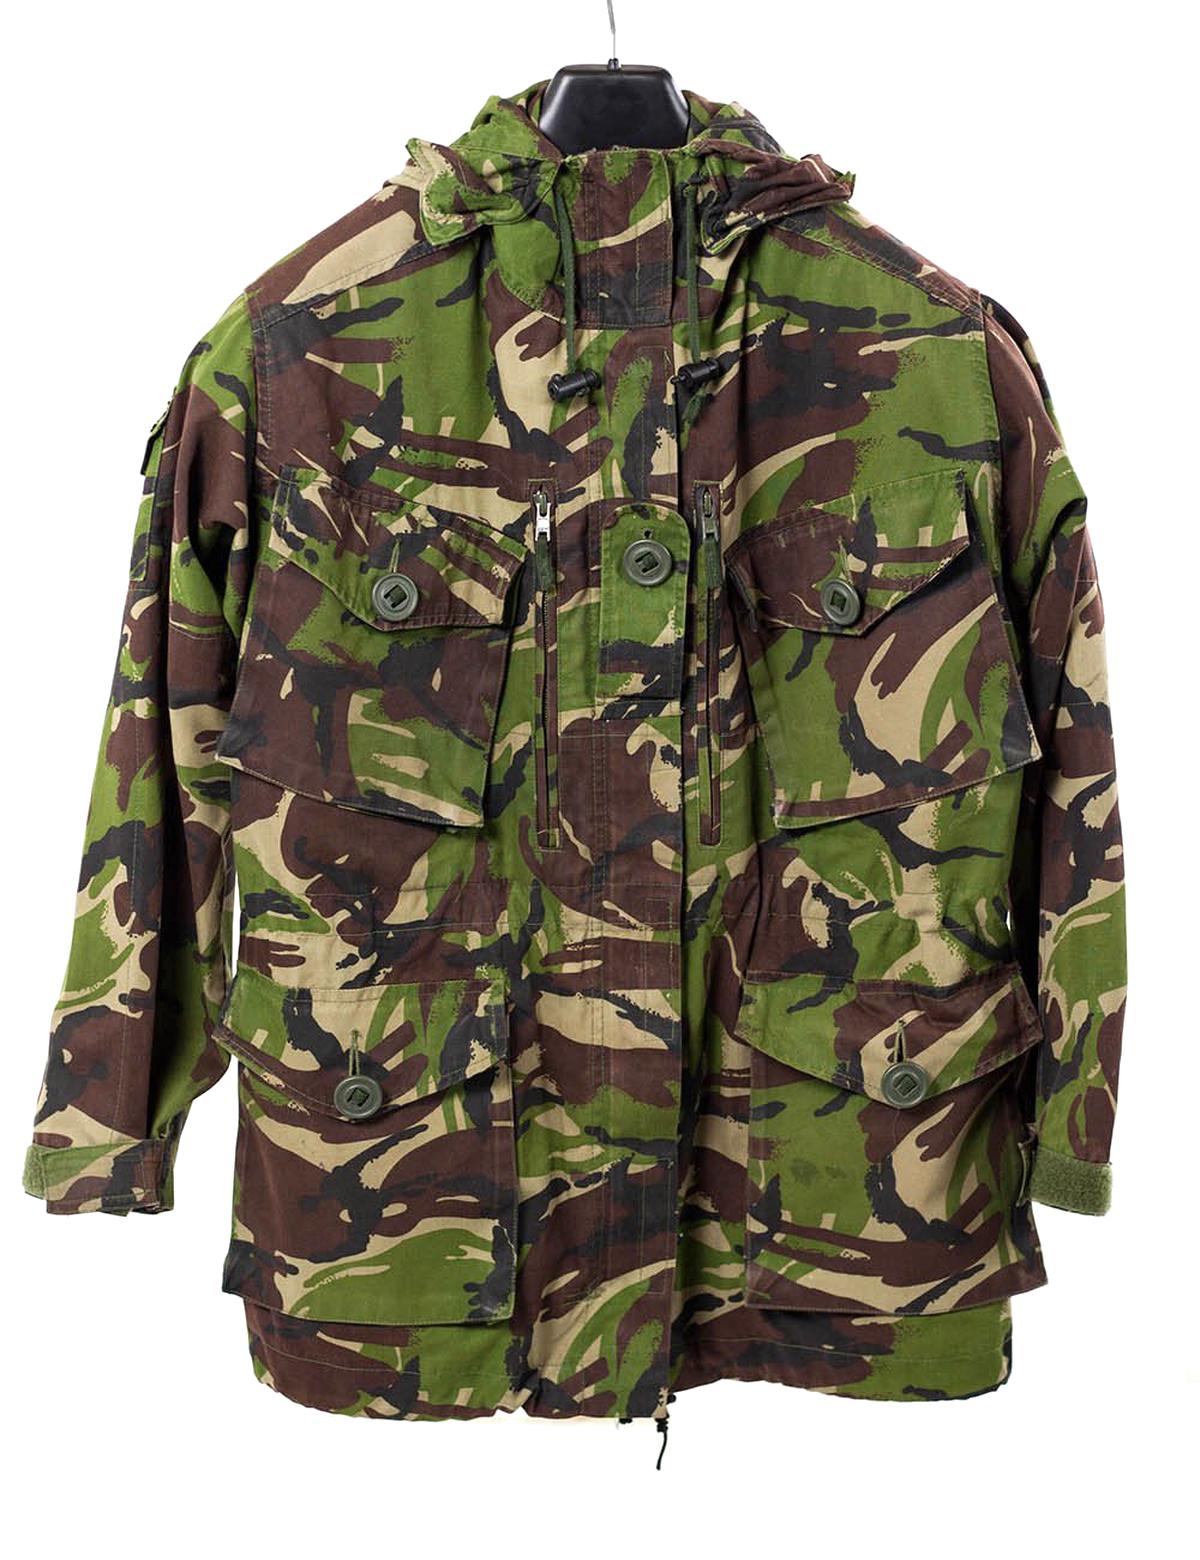 British Army Jacket for sale in UK | 83 used British Army Jackets